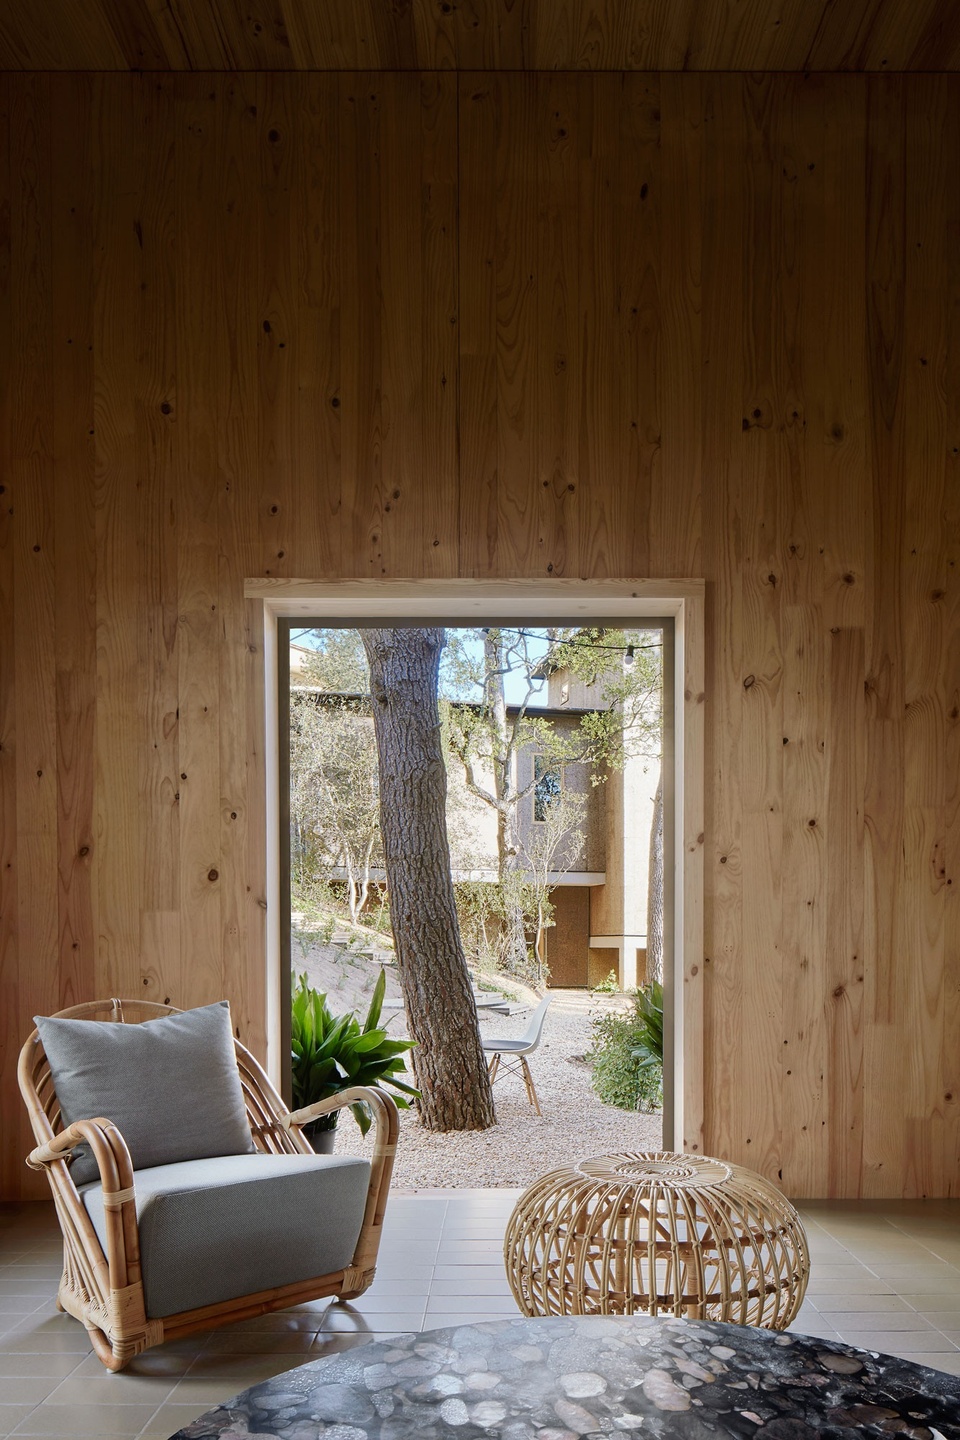 Internal view of the cork house with a cushioned chair and a rattan table. The view outside can be seen through the door opening